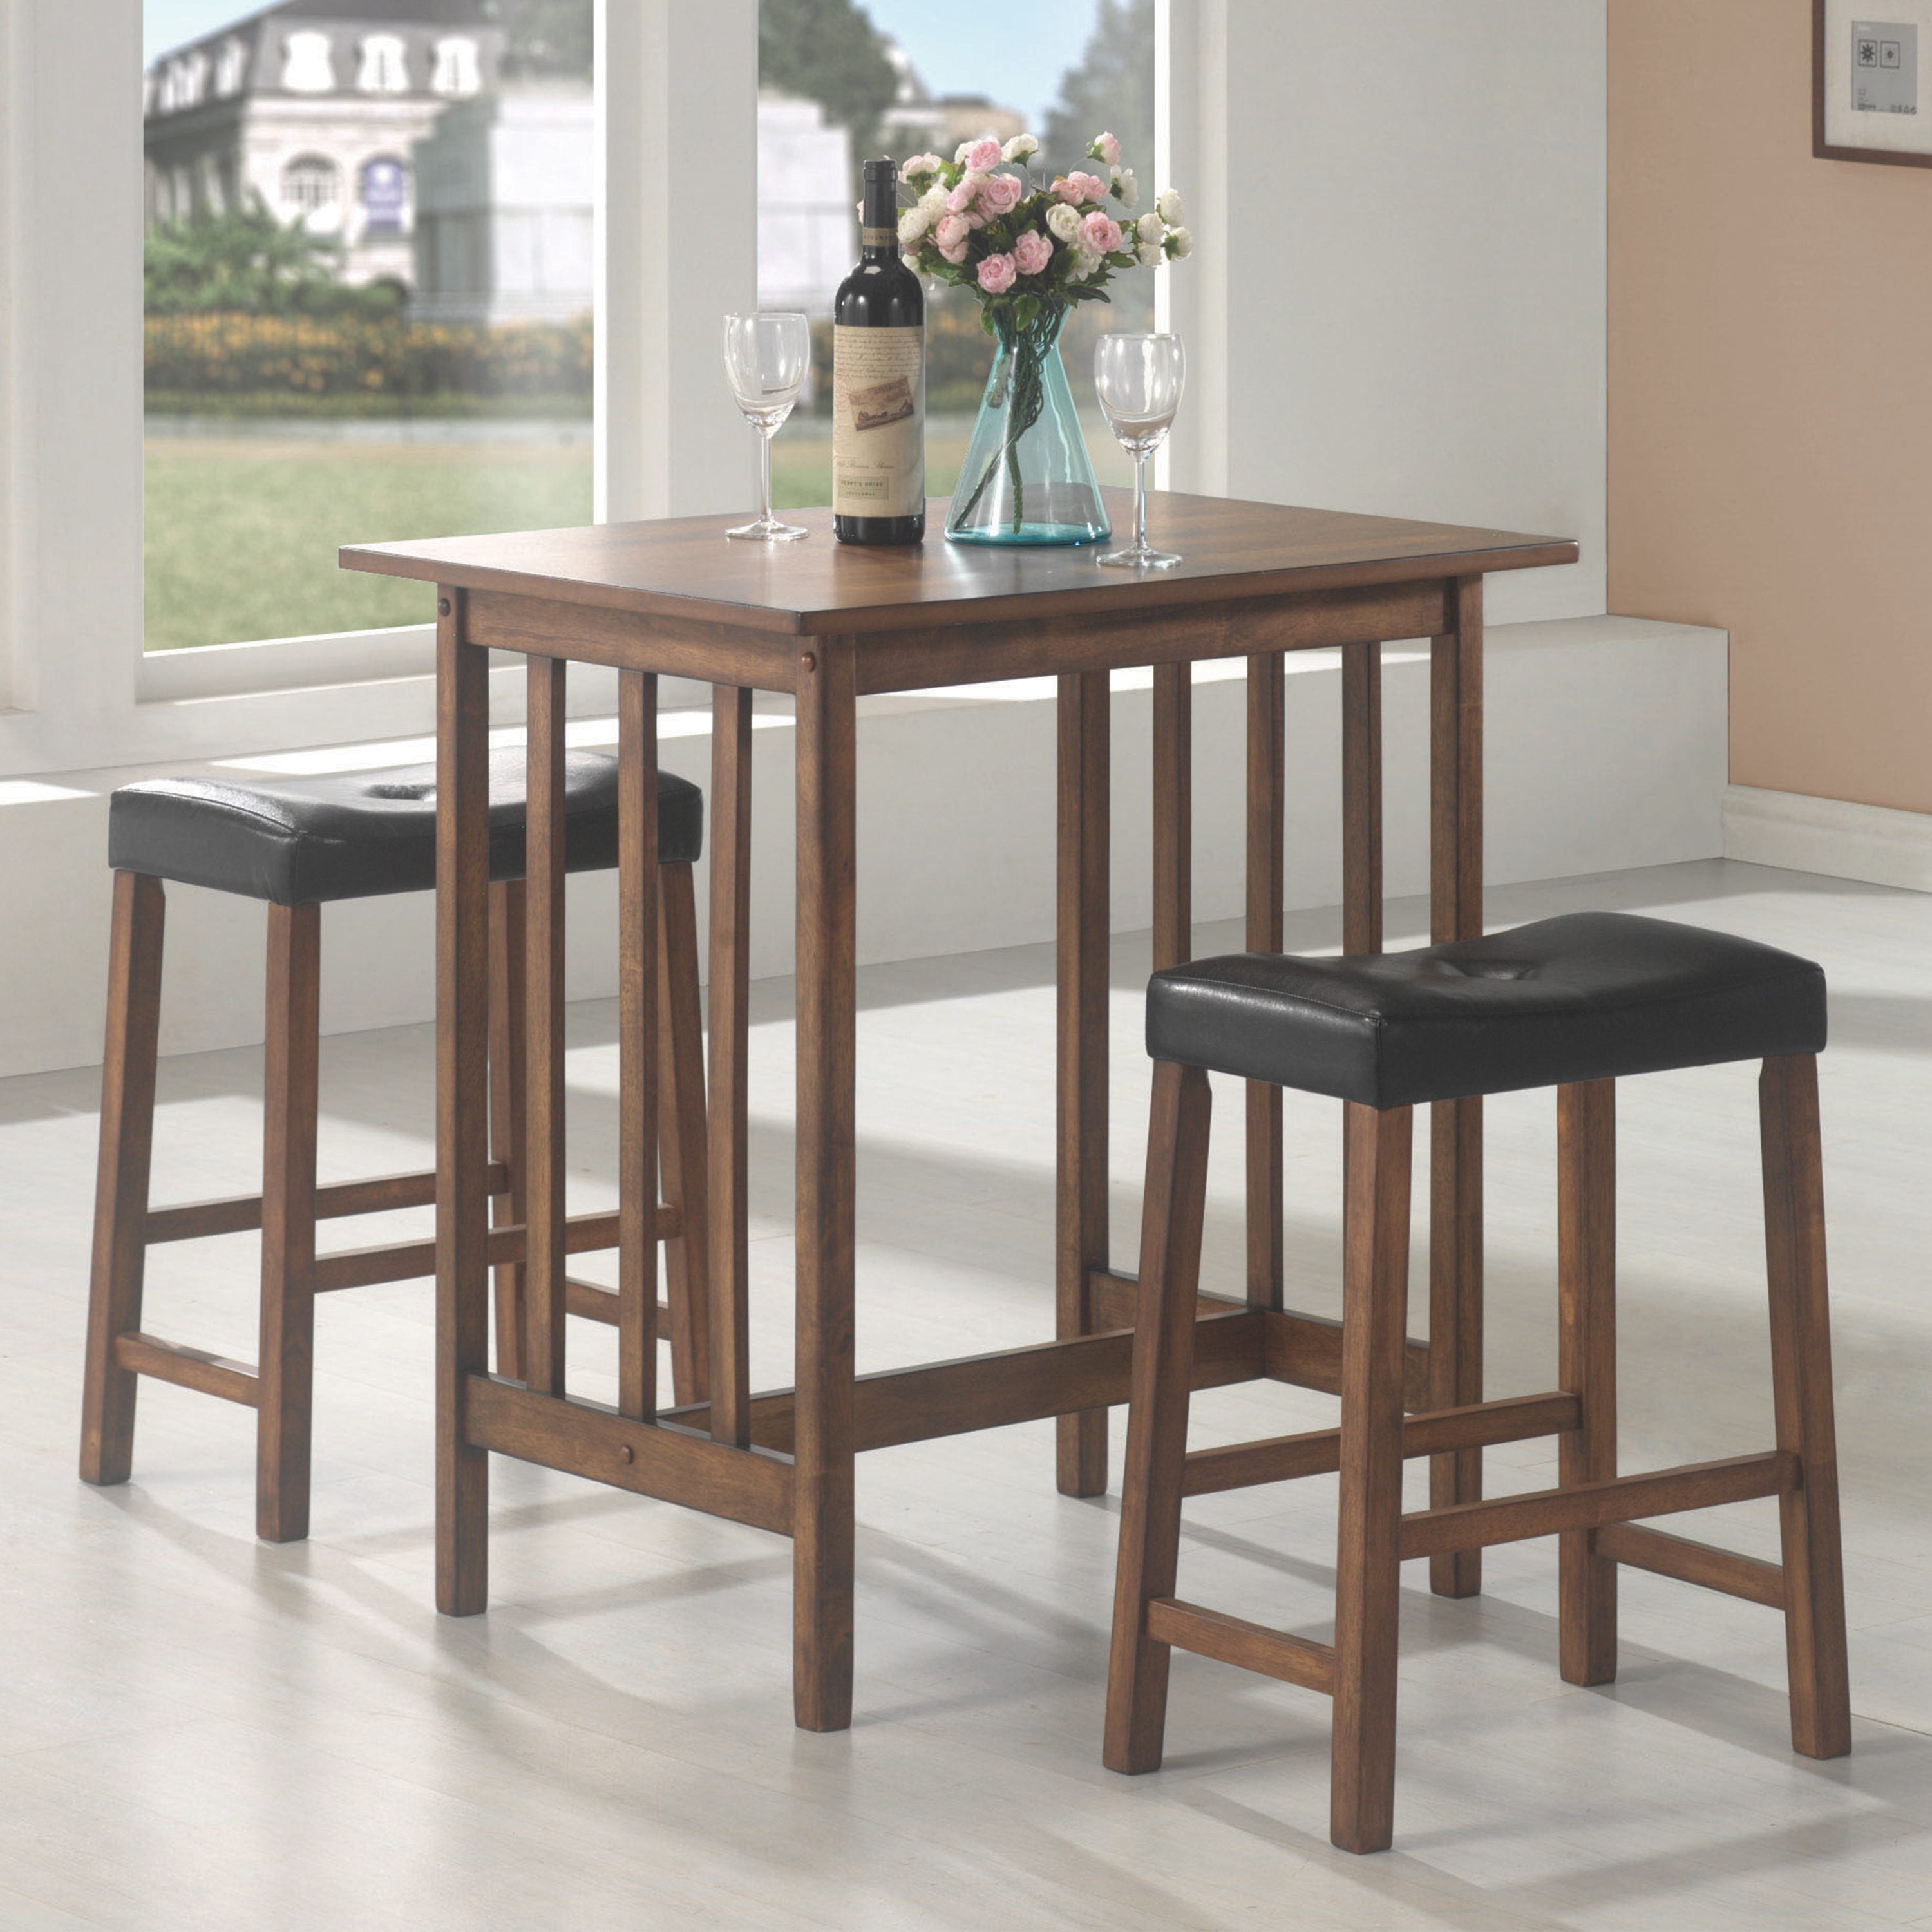 Winsome Mercer Double Drop Leaf Table With 2 Stools 2day Ship for sale online 